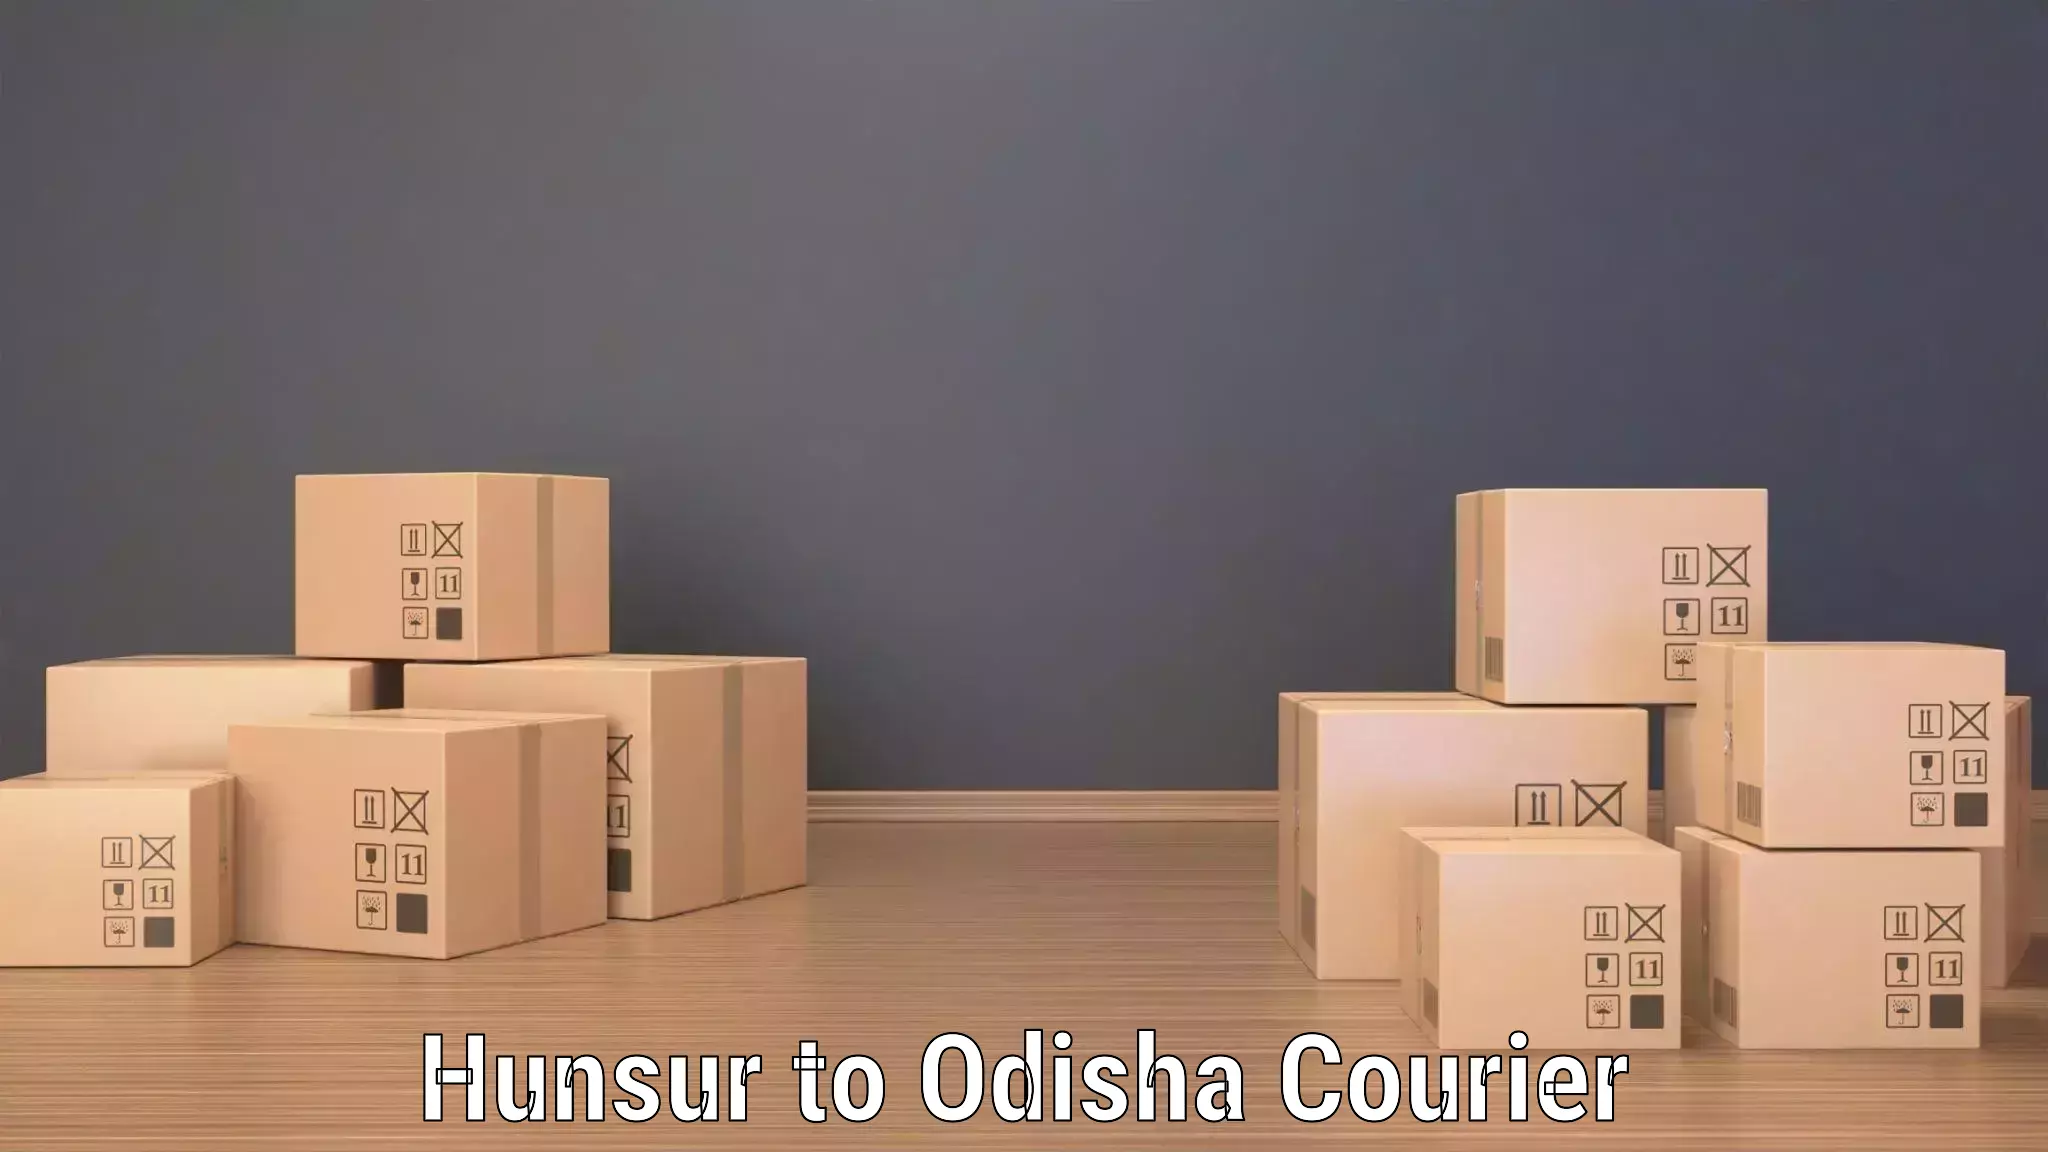 State-of-the-art courier technology in Hunsur to Swampatna